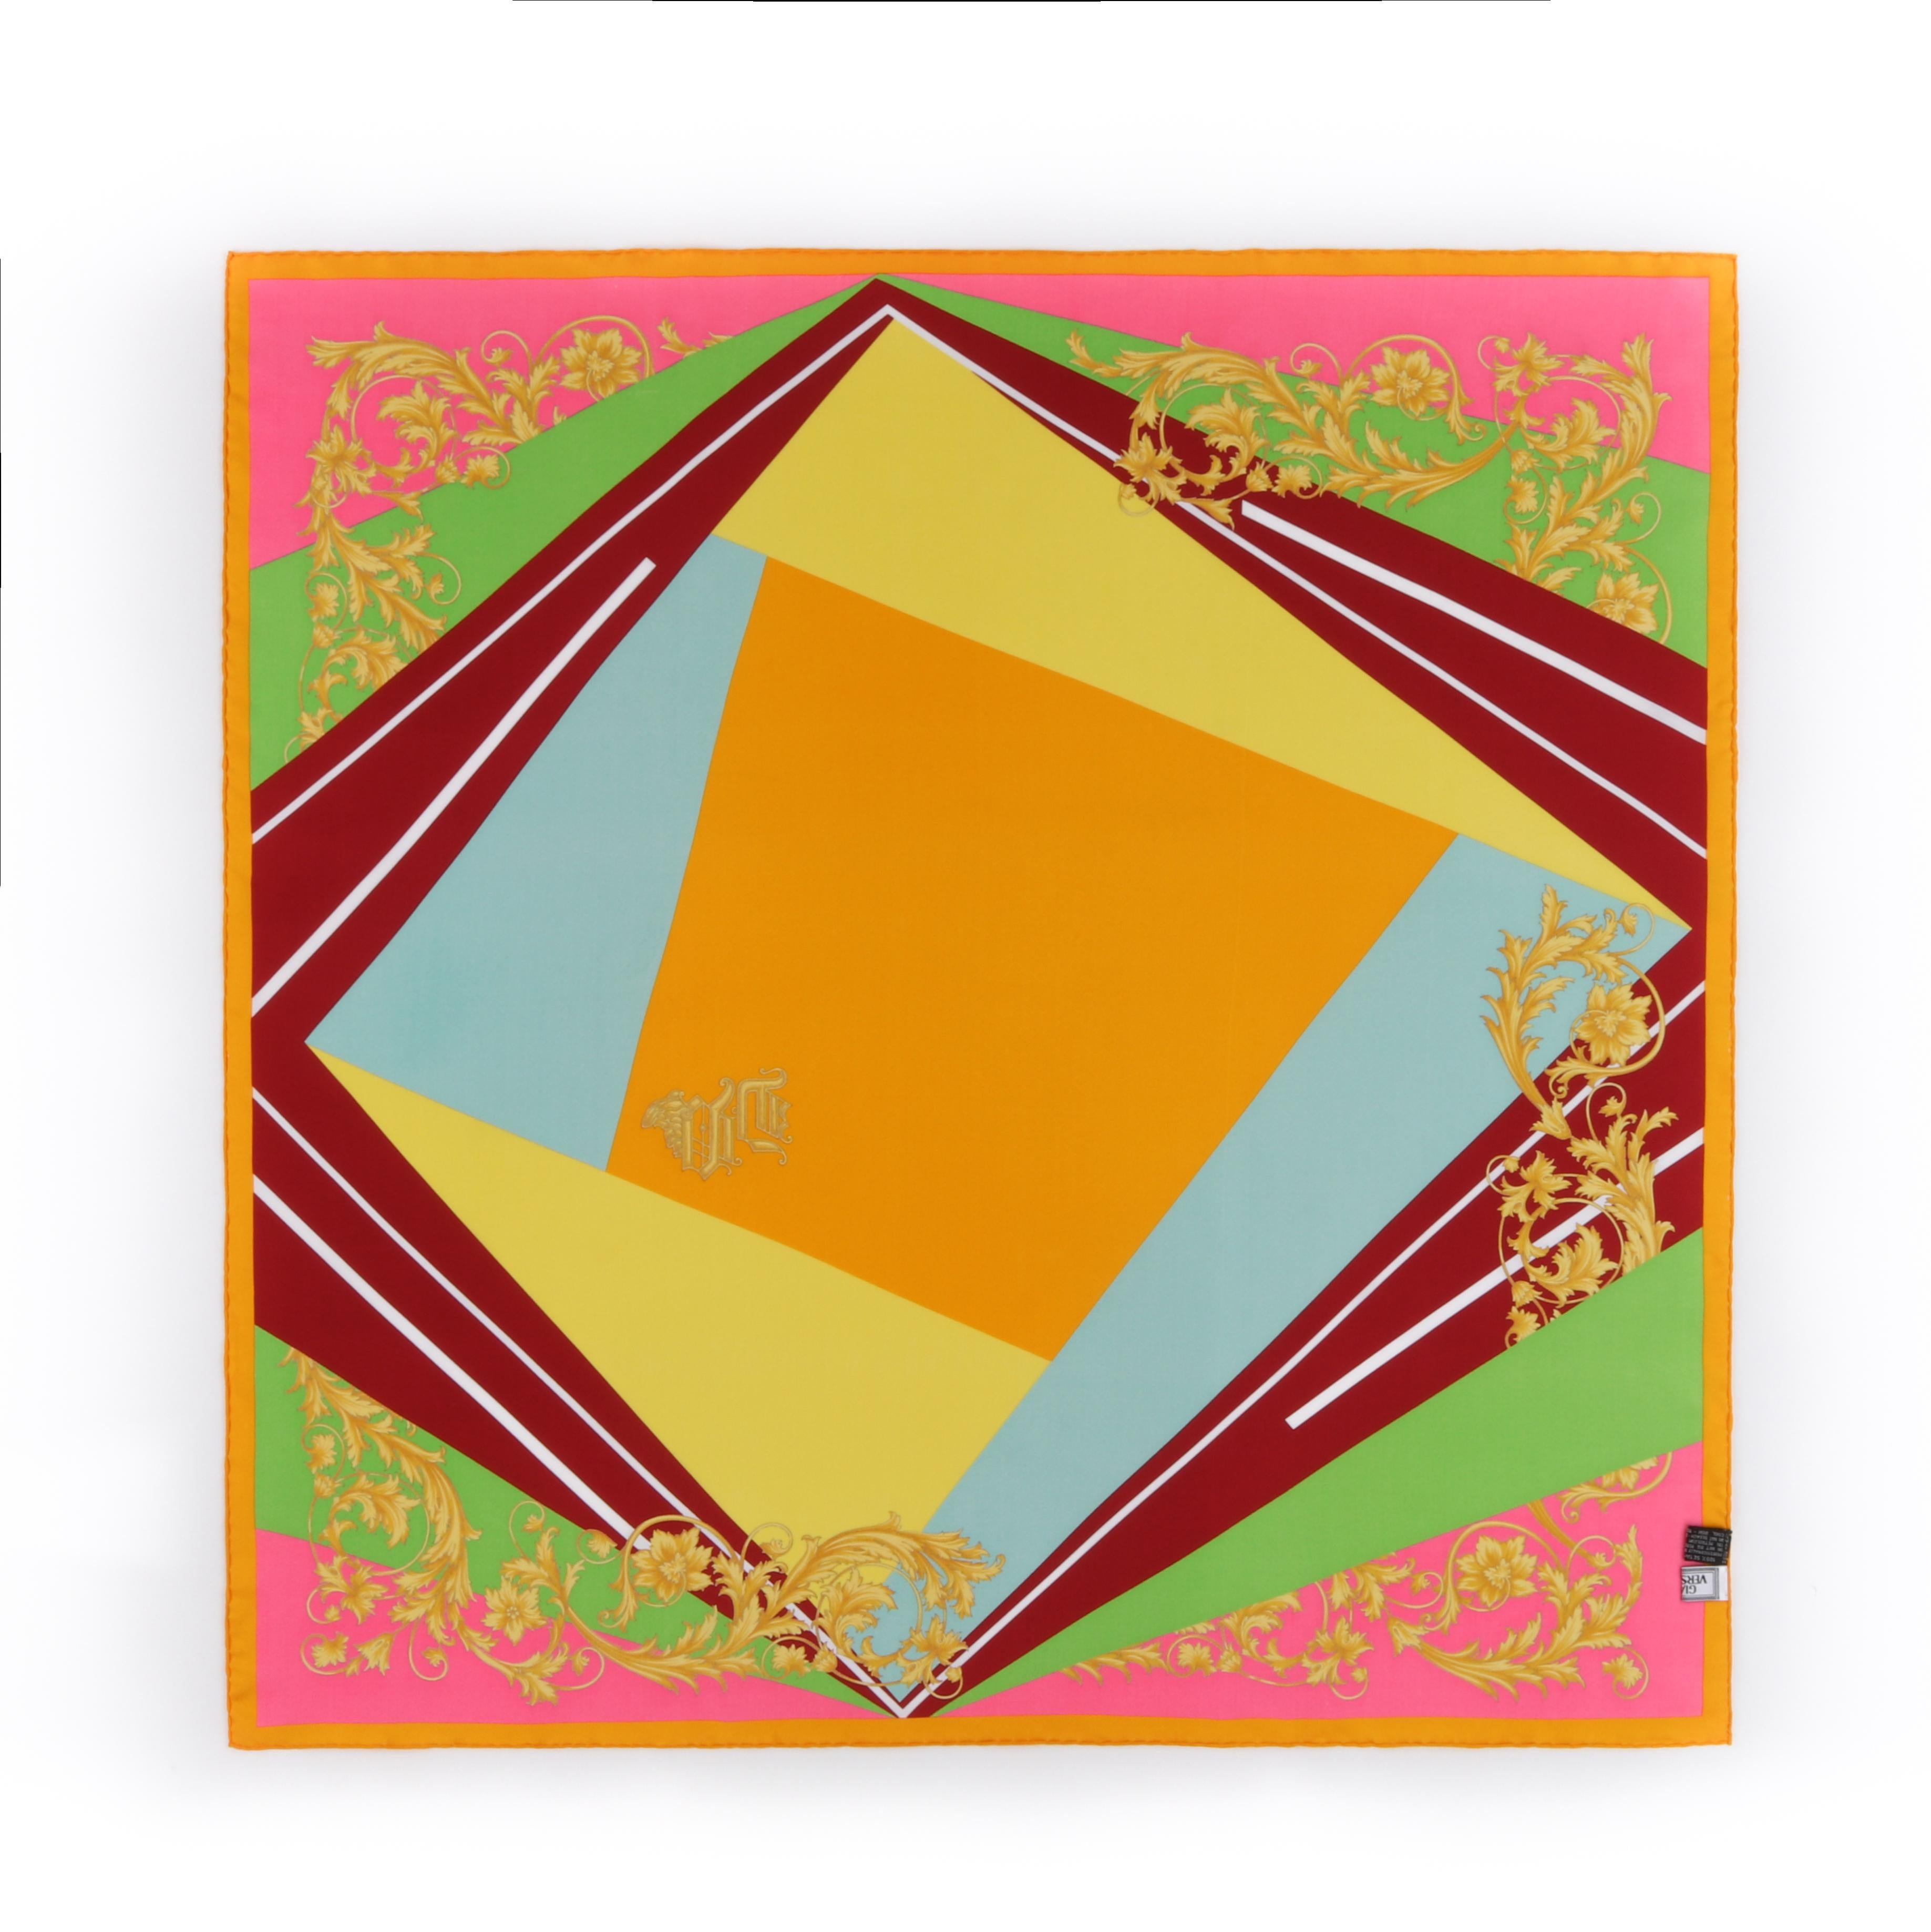 GIANNI VERSACE c.1990s Abstract Op Art Color Block DV Initials Silk Square Scarf
 
Circa: 1990’s 
Brand / Manufacturer: Gianni Versace
Designer: Donatella Versace
Style: Square scarf
Color(s): Bright orange, yellow, red, green, blue, pink
Marked